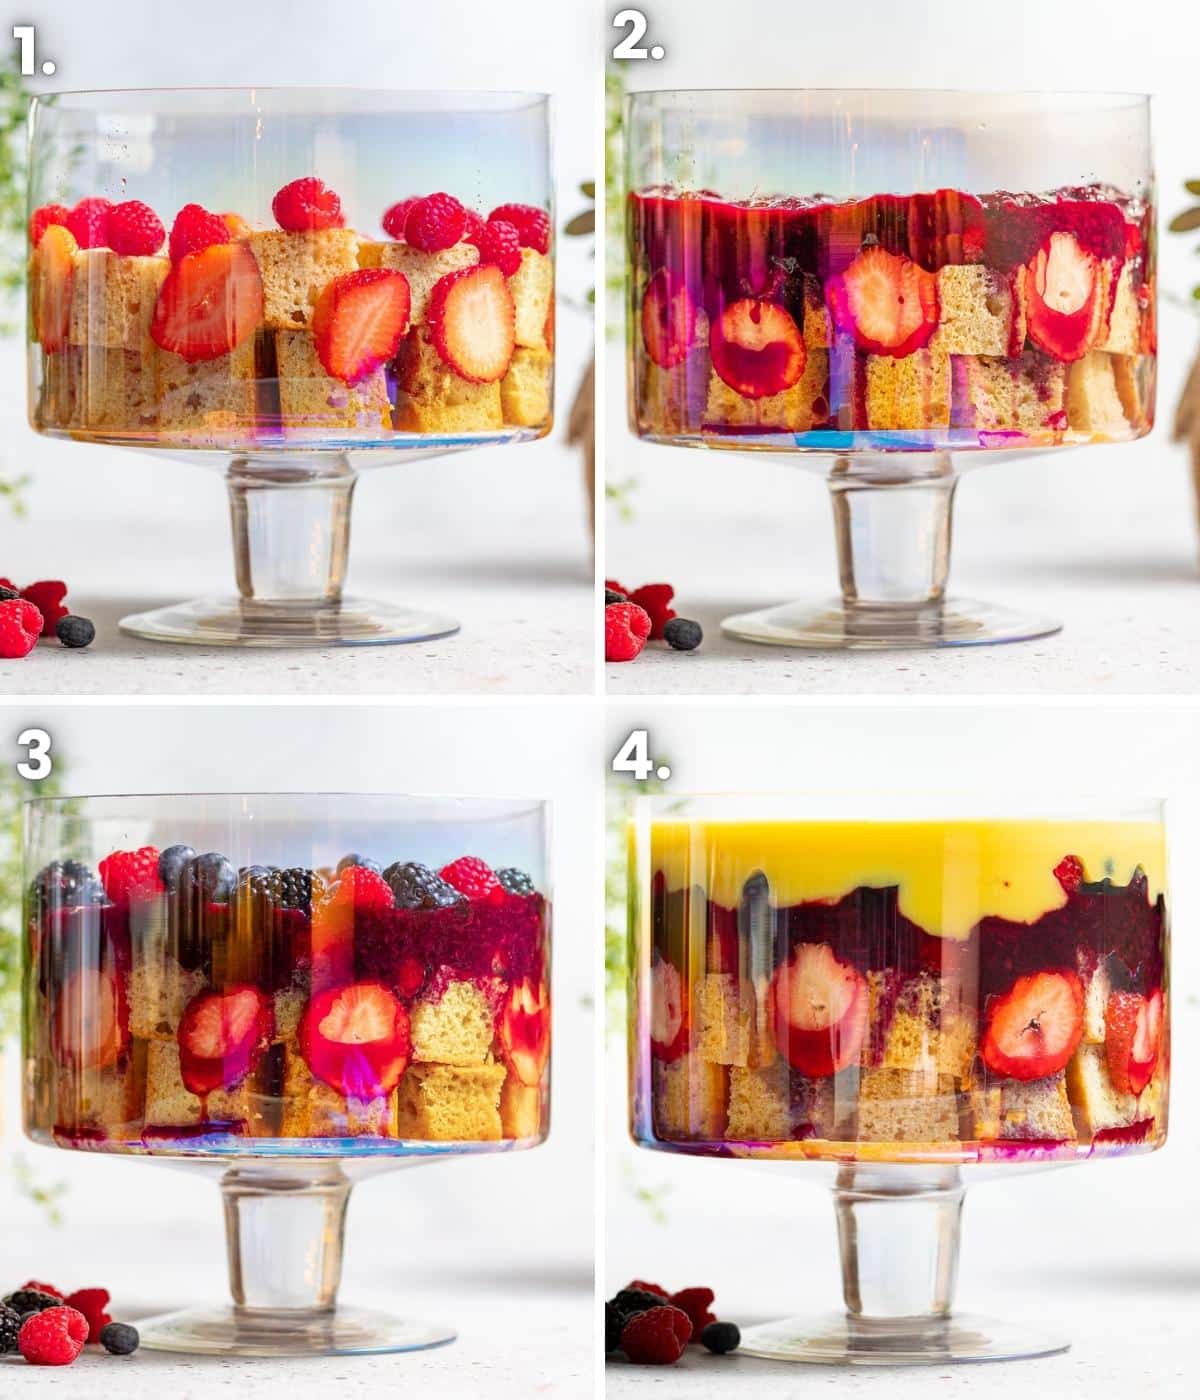 vegan trifle layers step by step